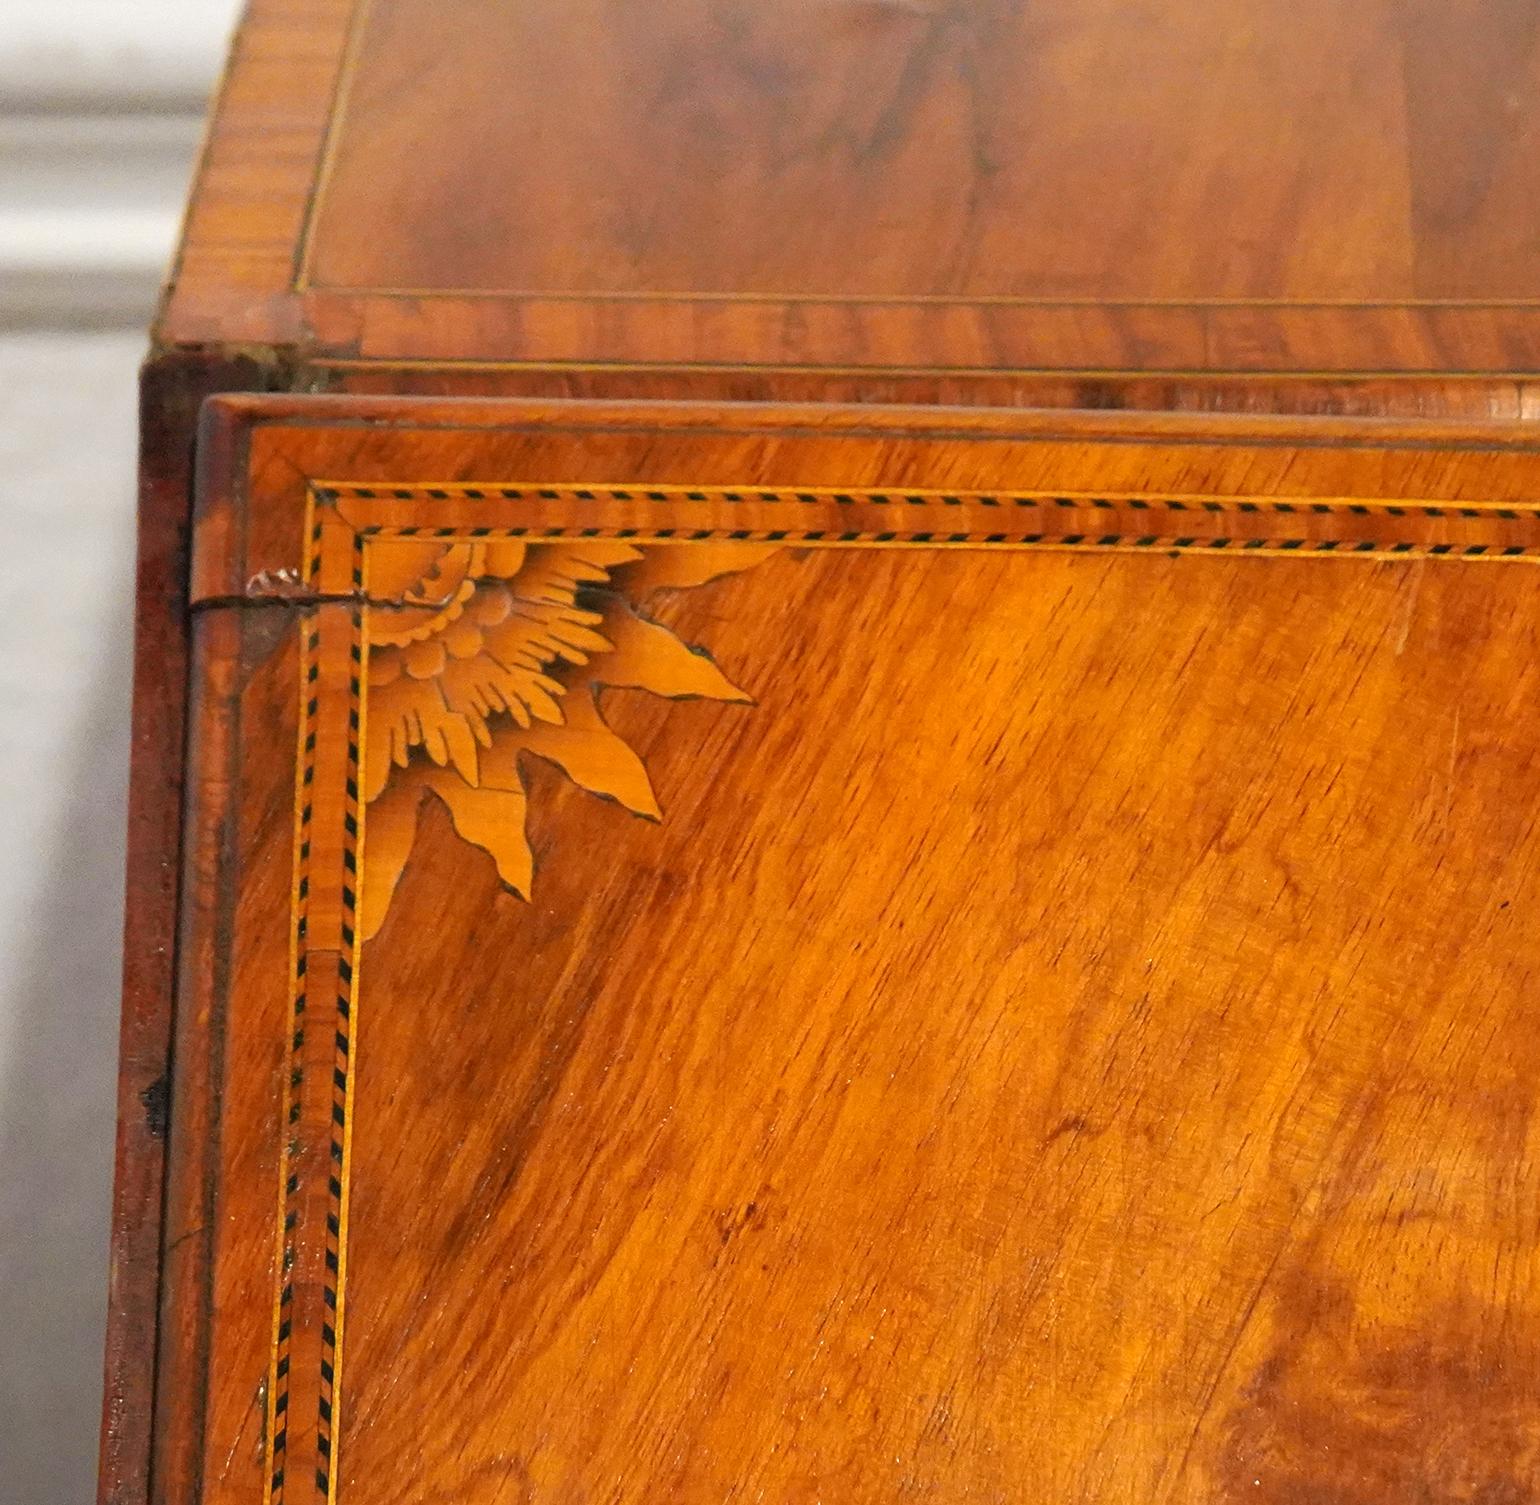 Baroque Late 18th C. Dutch Richly Inlaid Two Part Walnut and Satinwod Fall Front Bureau For Sale